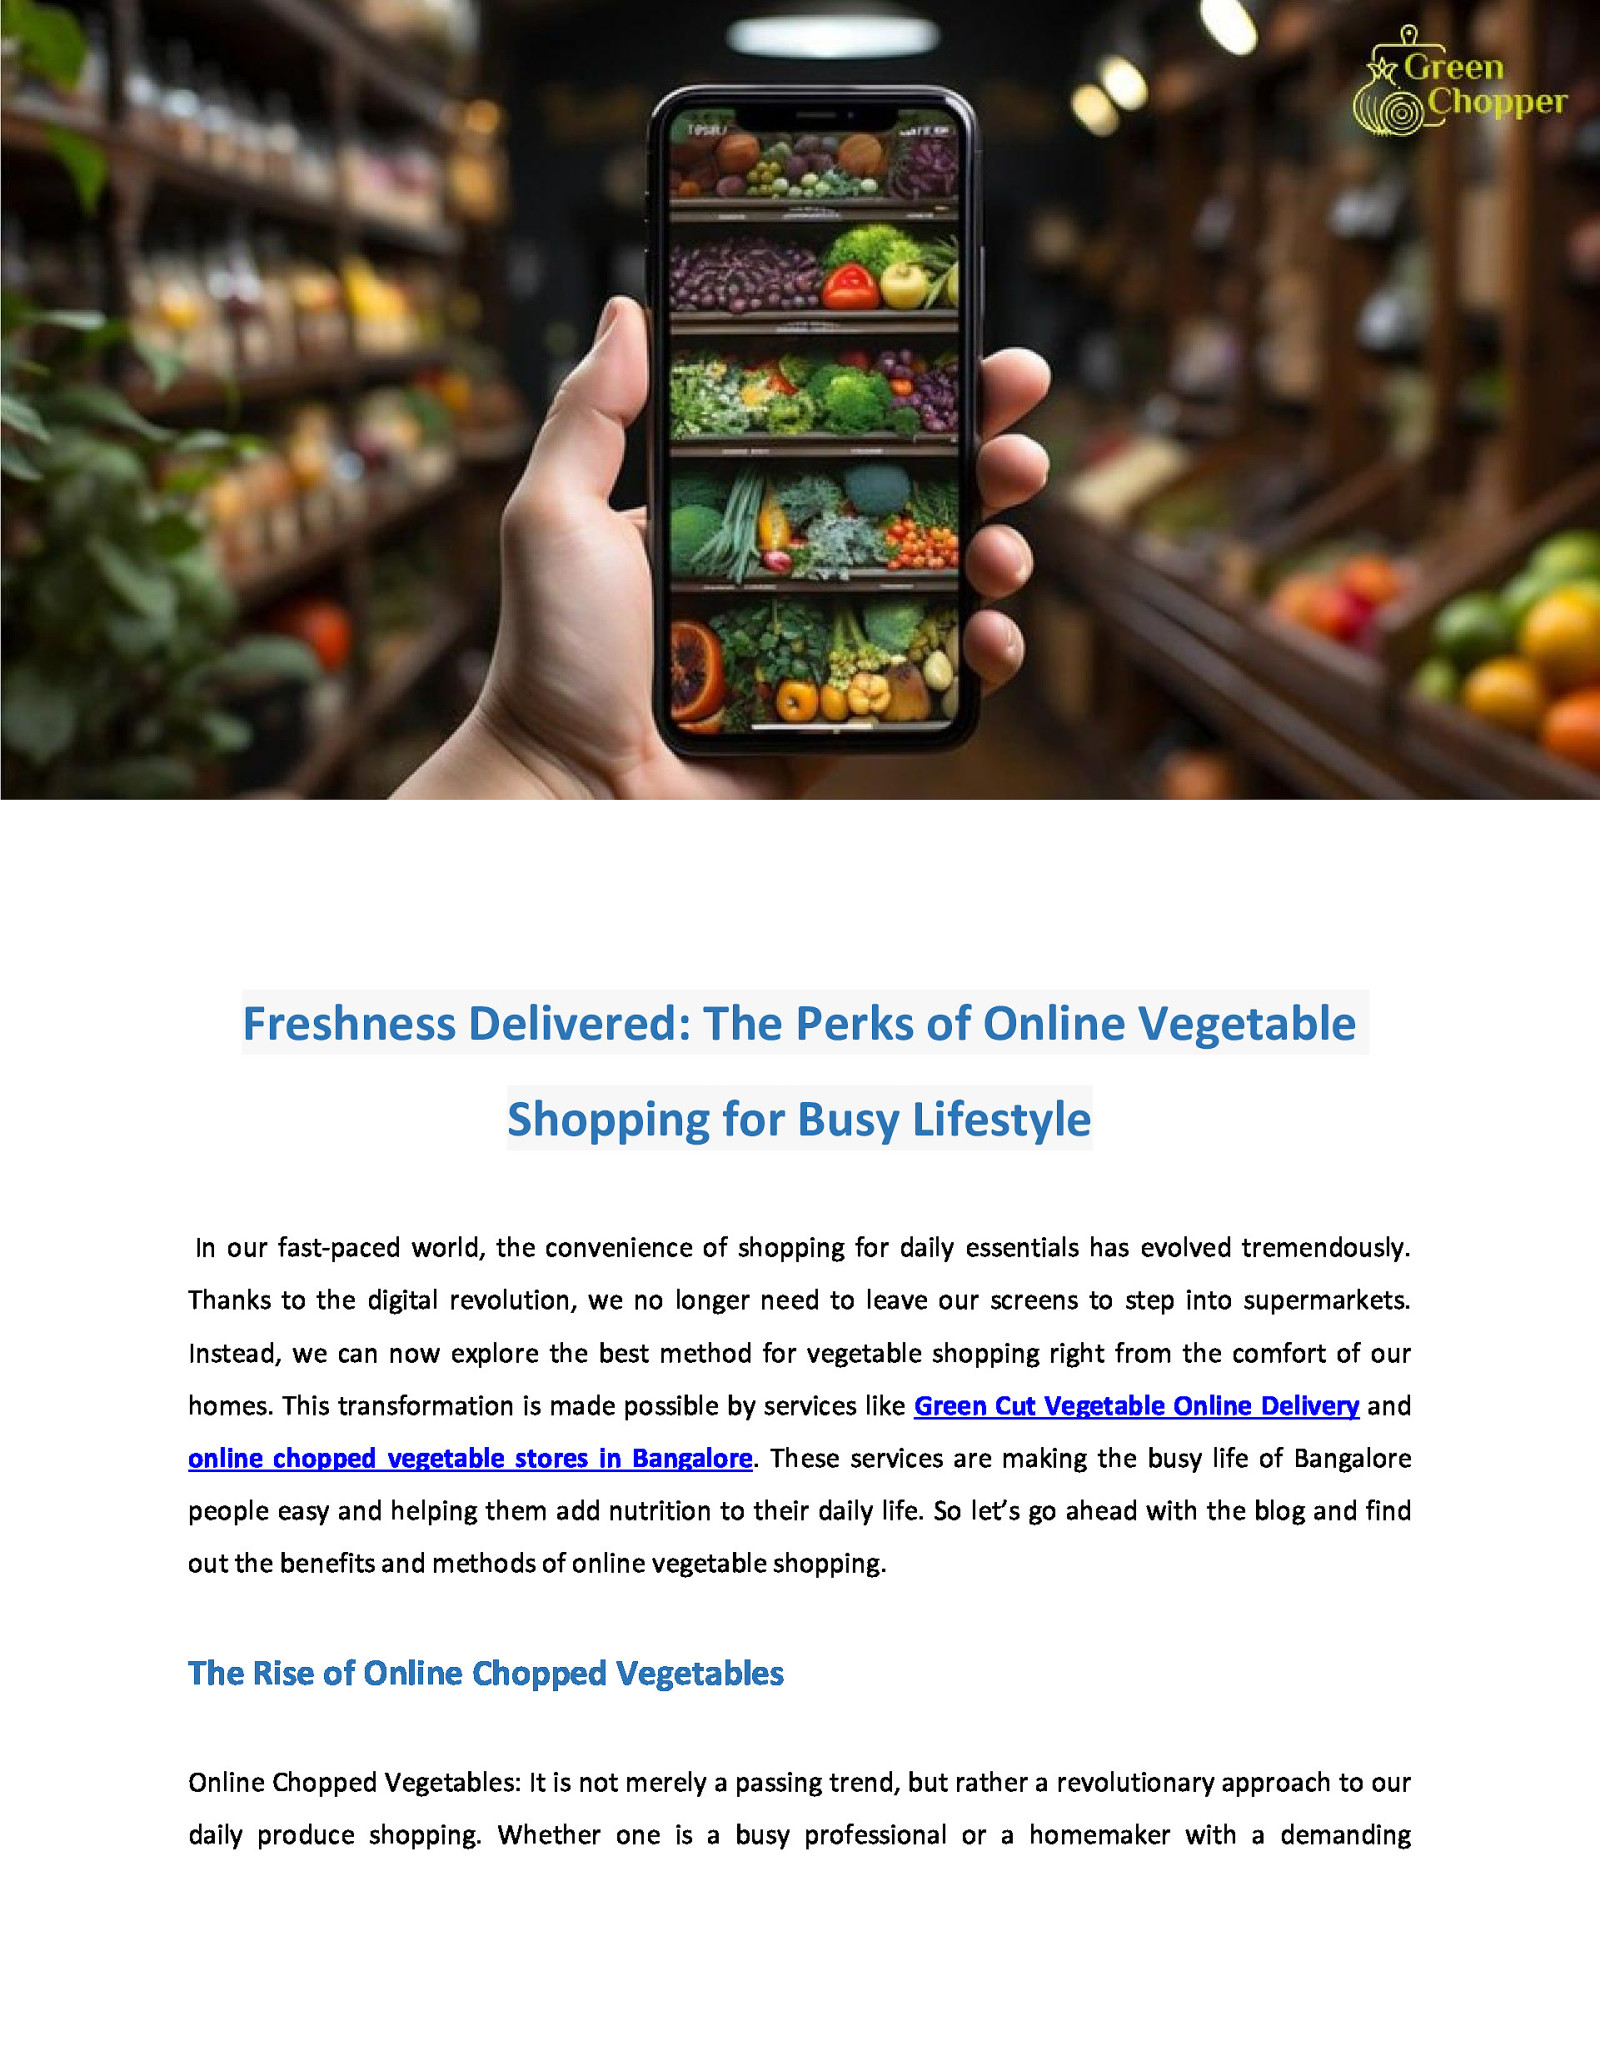 Freshness Delivered: The Perks of Online Vegetable Shopping for Busy Lifestyle